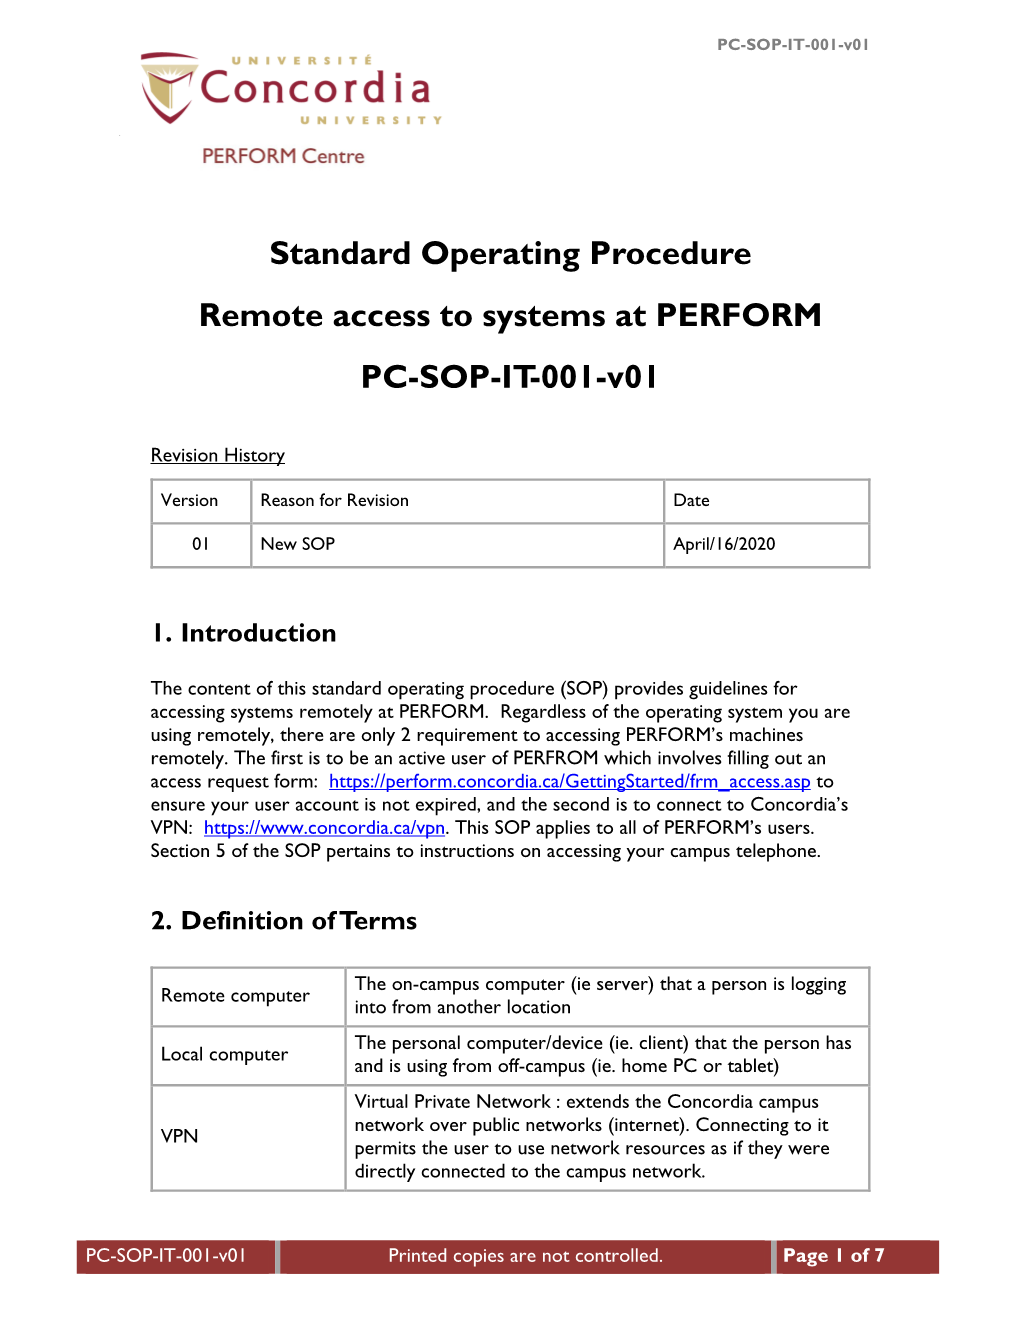 Standard Operating Procedure Remote Access to Systems At